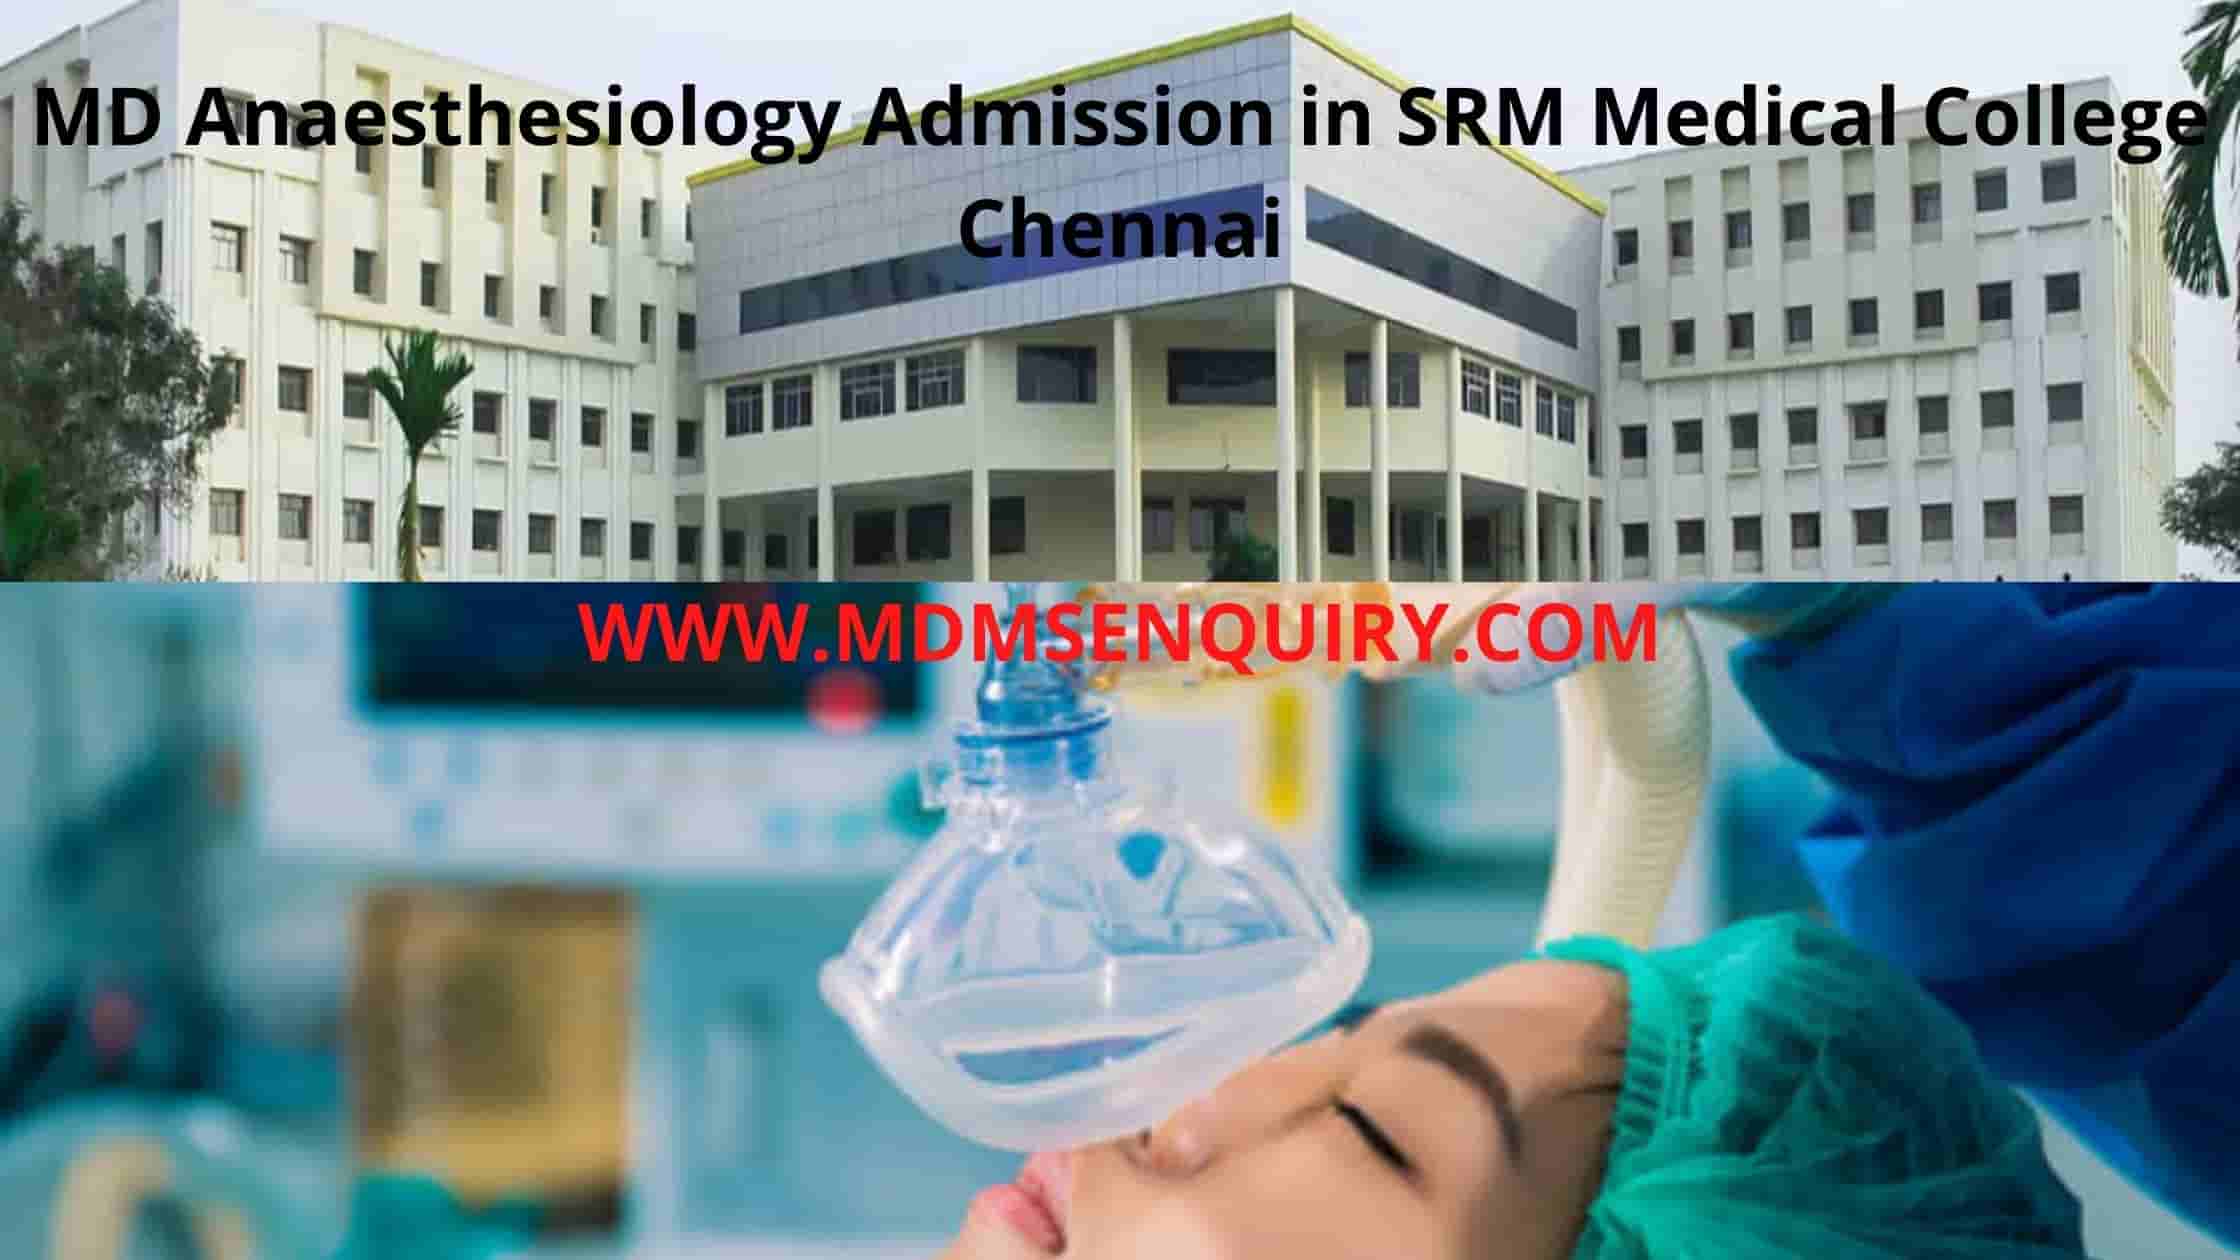 MD Anaesthesiology admission in SRM Medical College ChennaiMD Anaesthesiology admission in SRM Medical College Chennai